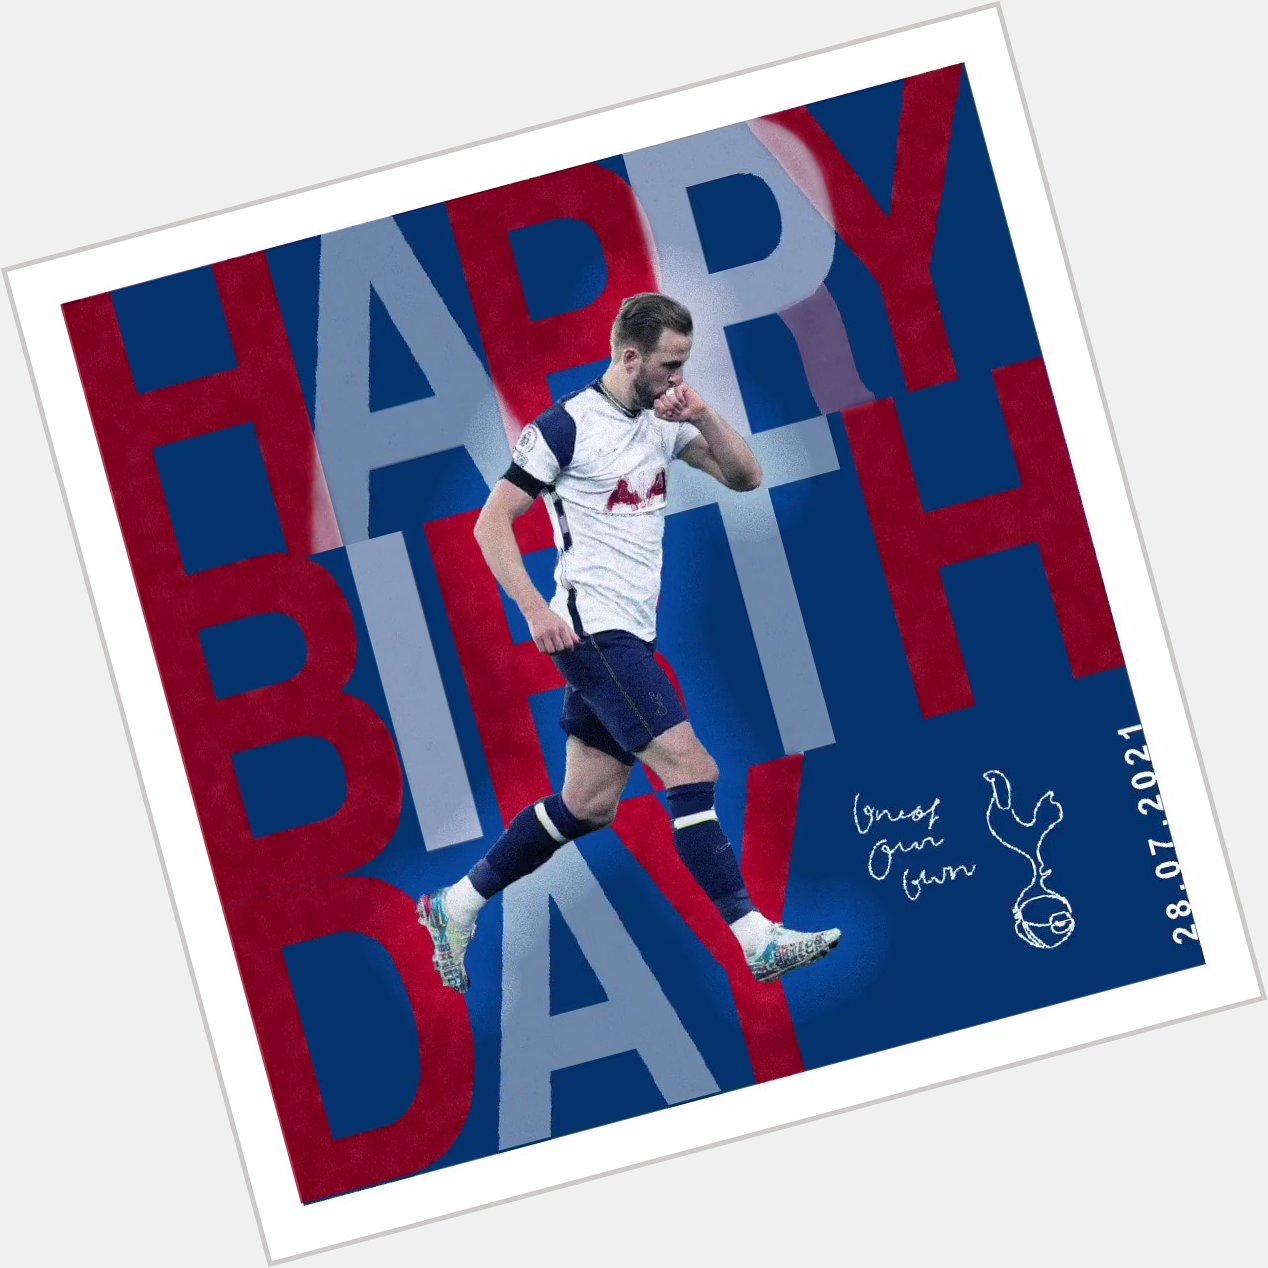 Happy birthday Harry kane! Wishing all the best for you..  